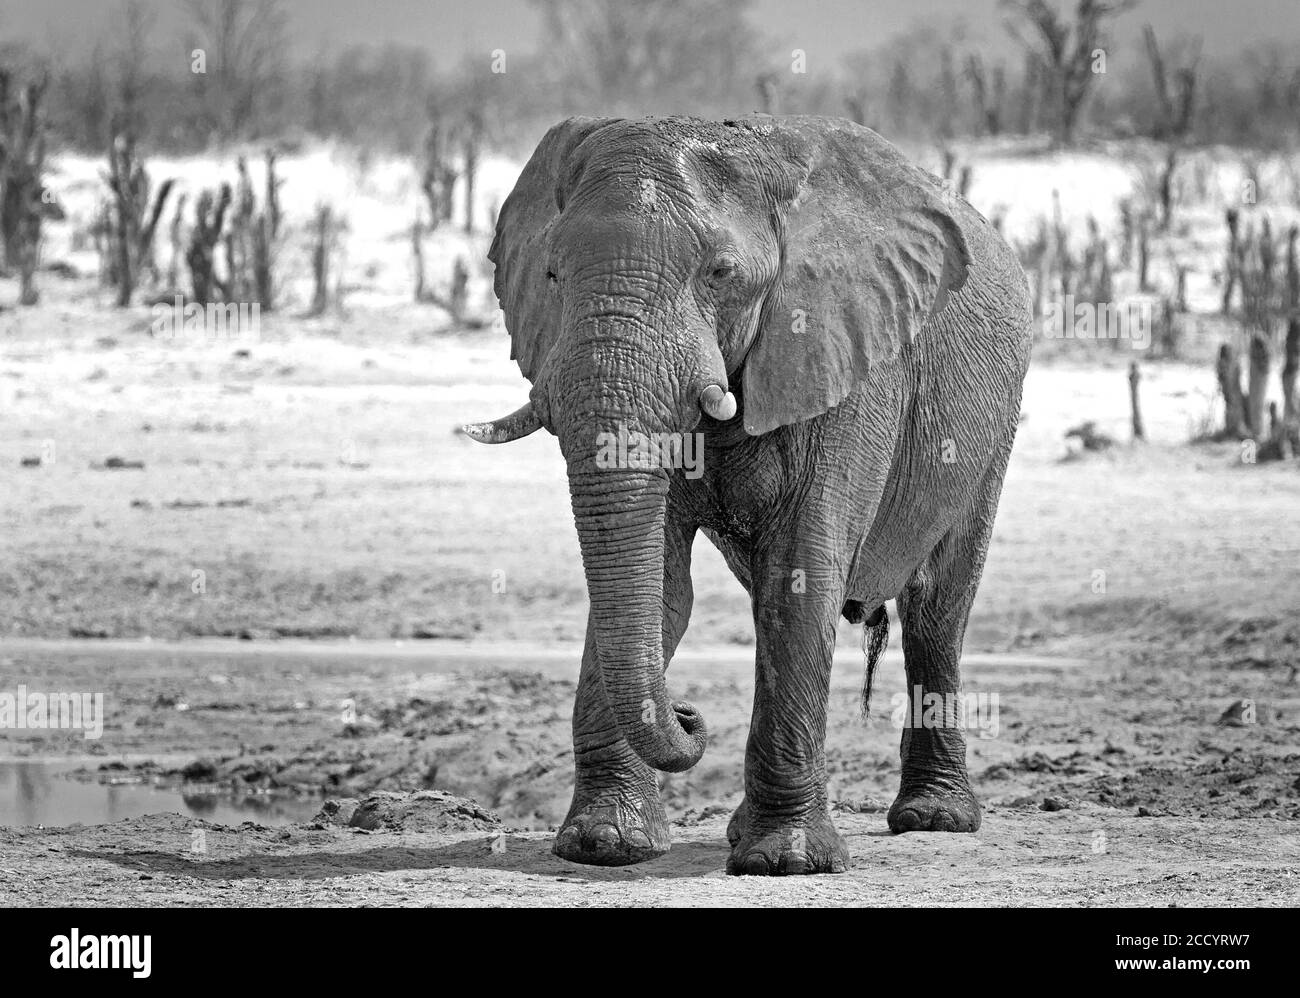 Black & White image of a Large African Elephant standing on the African Plains in Hwange National Park Zimbabwe Stock Photo